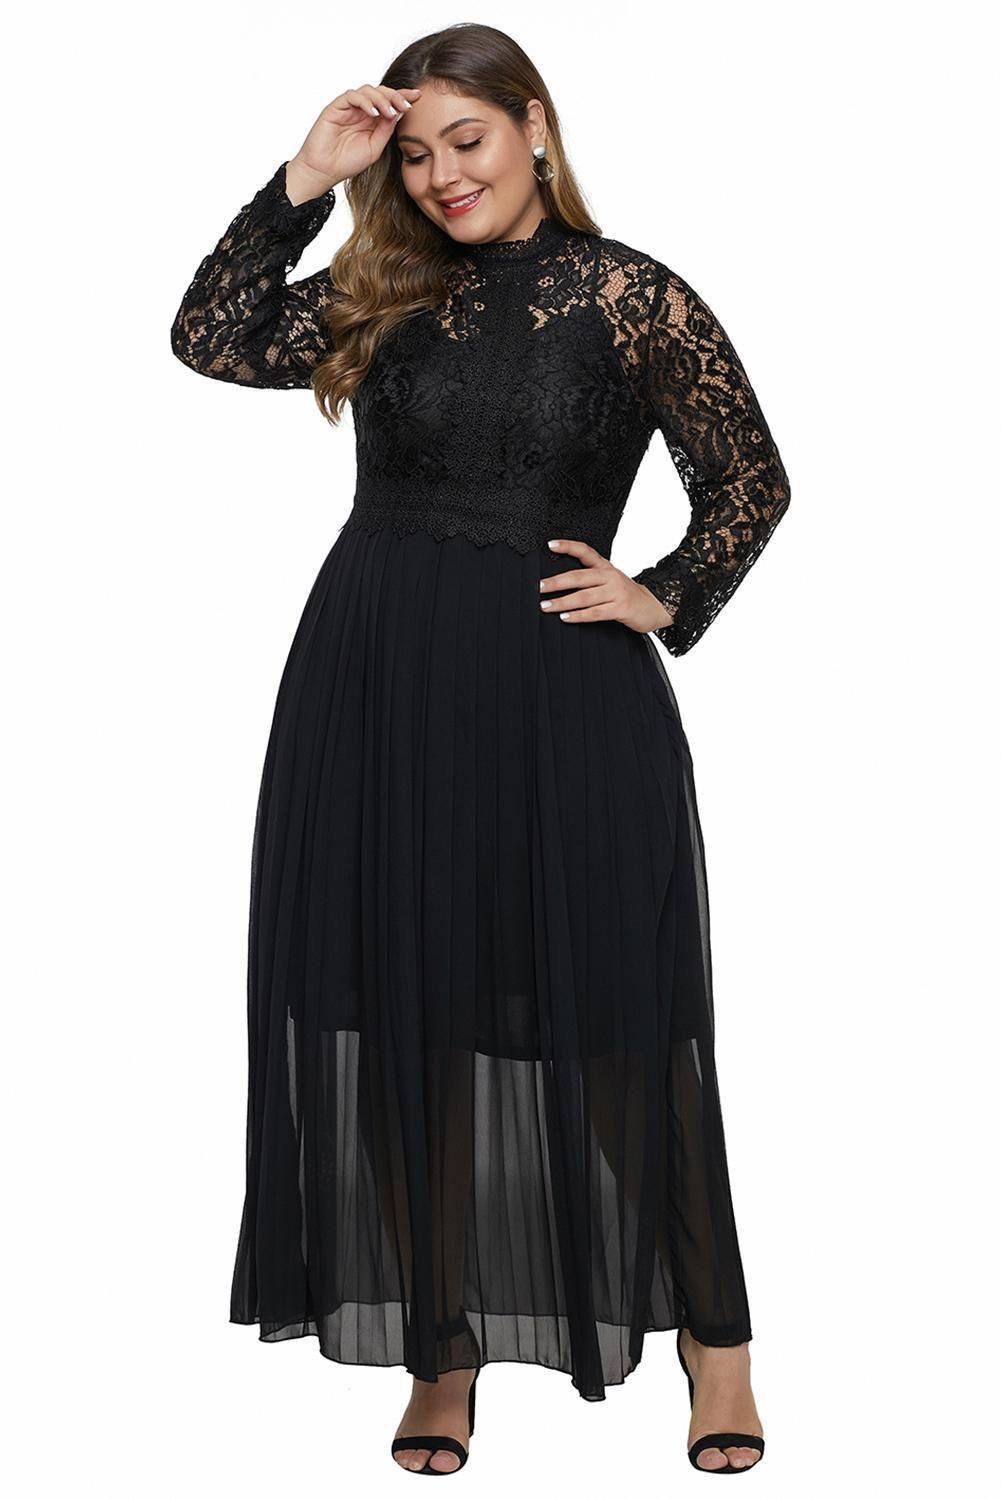 Black High Neck Long Sleeve Lace Plus Size Maxi Dress Top -   17 dress Plus Size with sleeves ideas